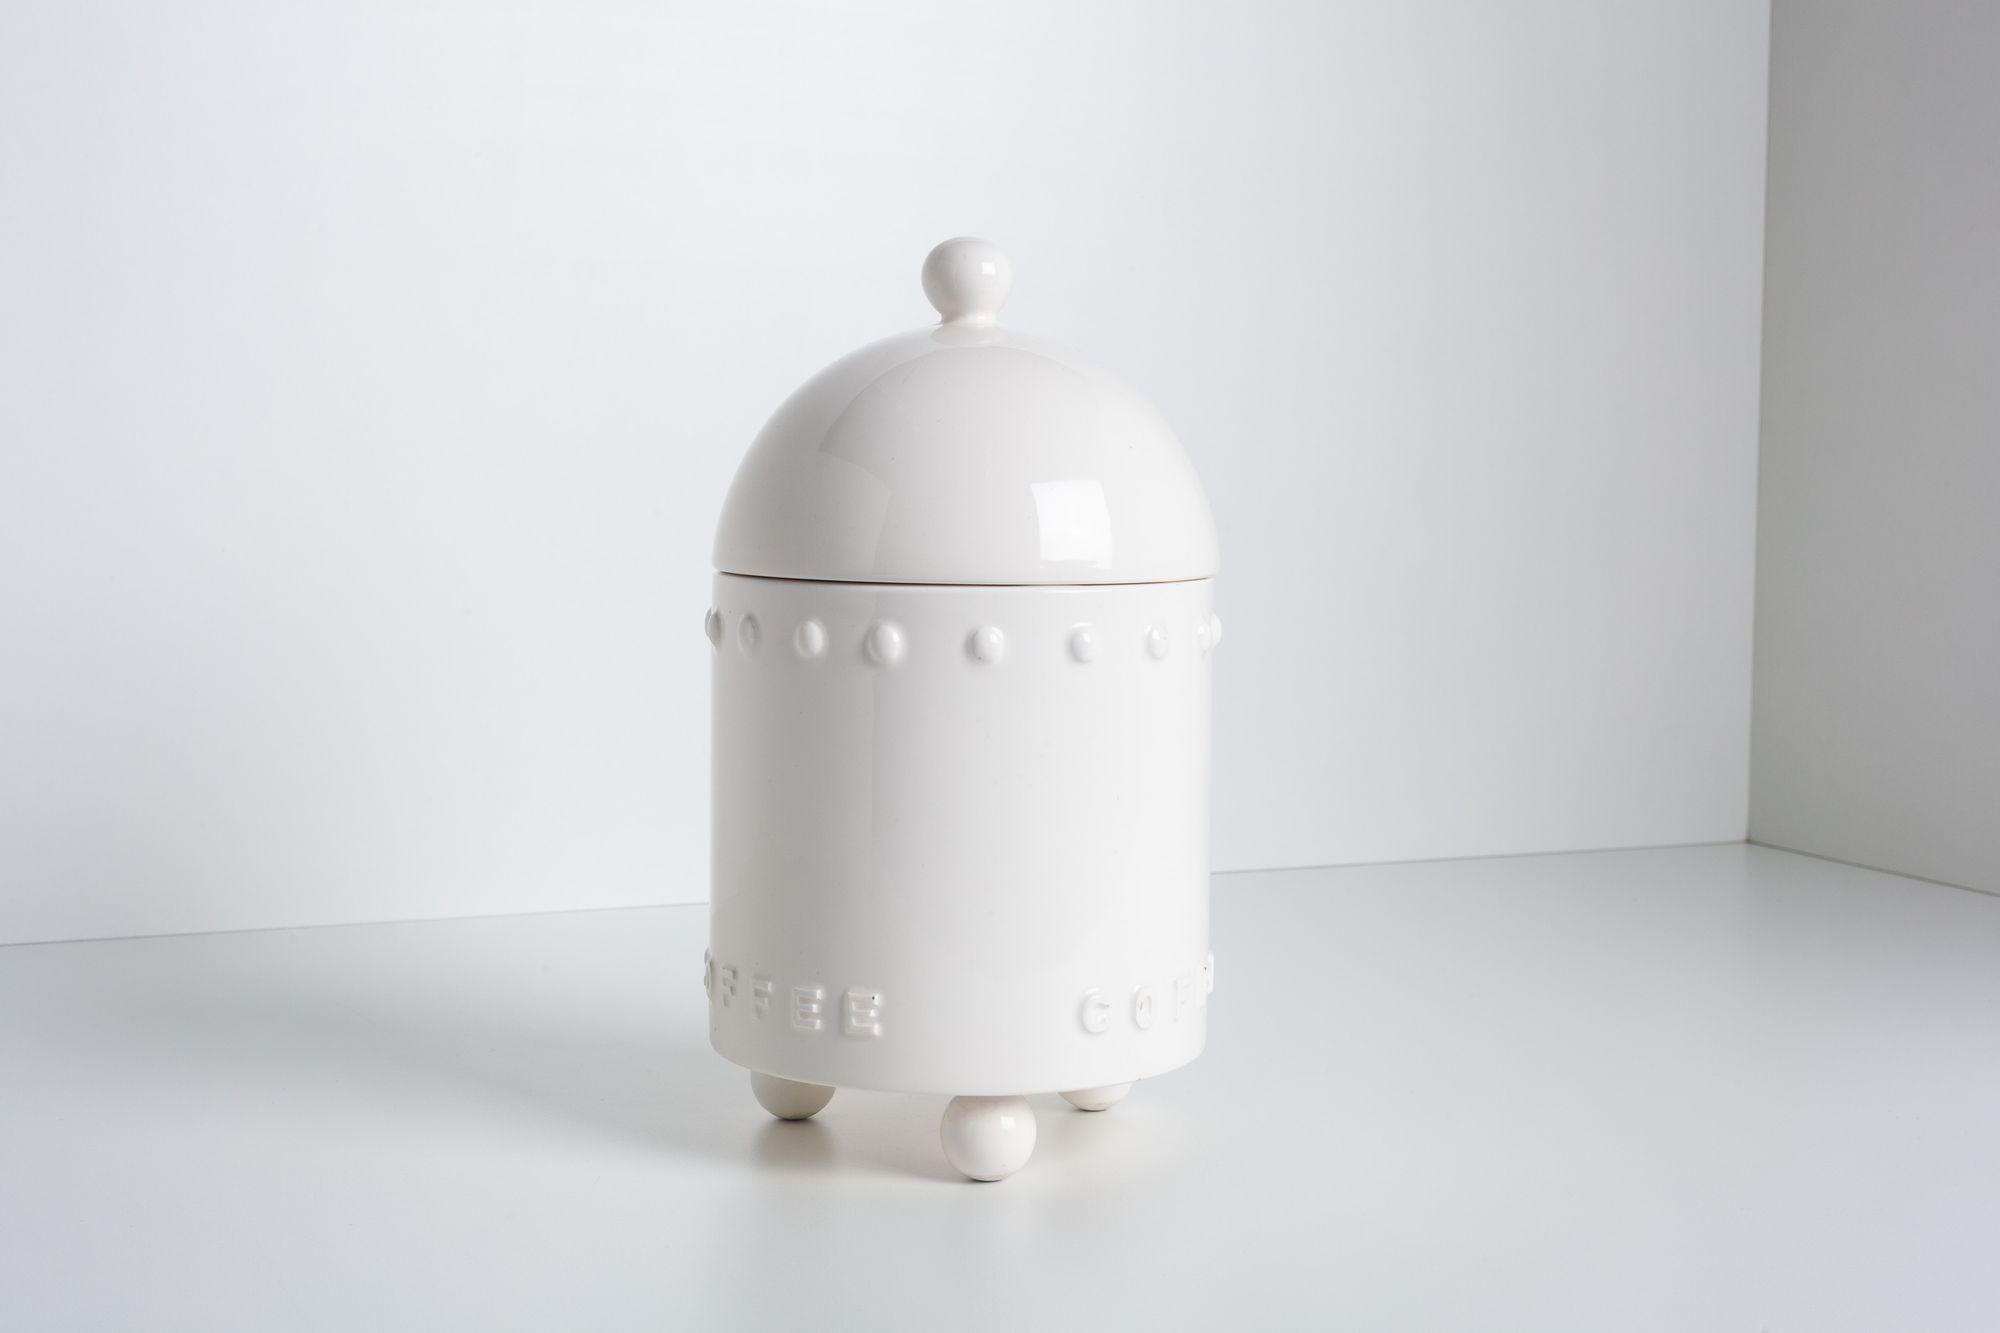 Extremely rare 1988 porcelain coffee canister for Swid Powell by winner of the 1933 World's Fair 